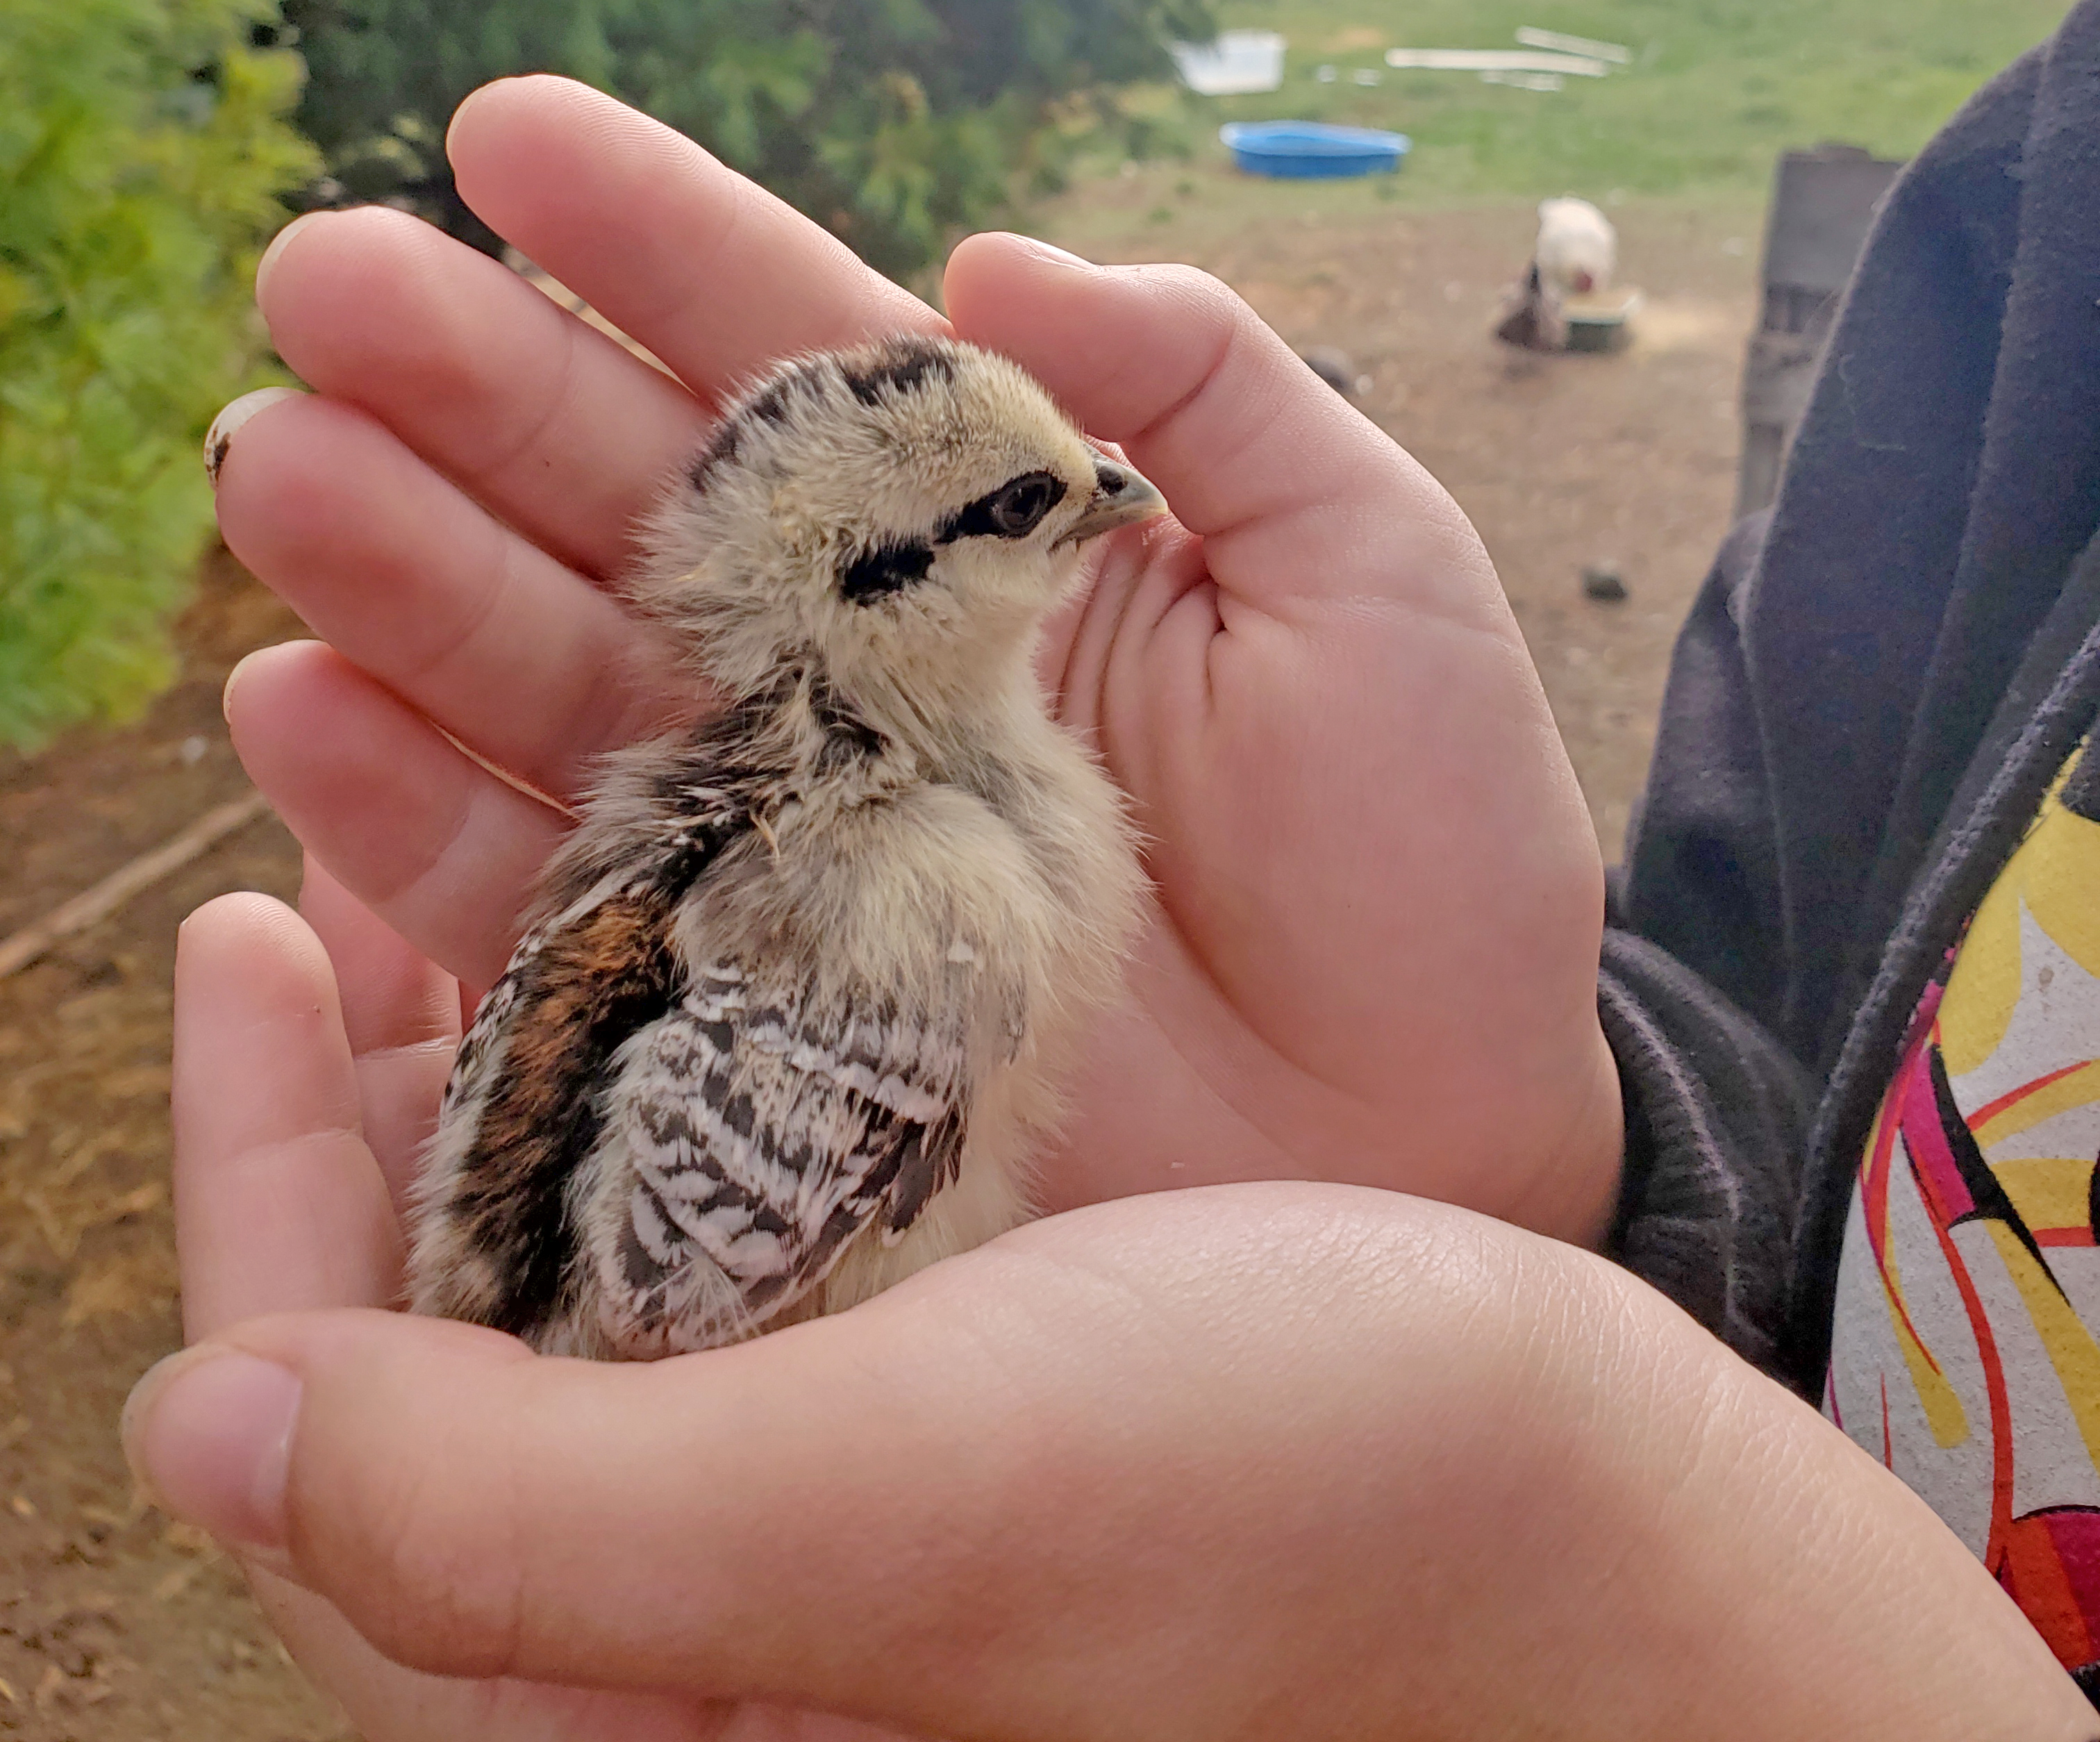 Chick being held